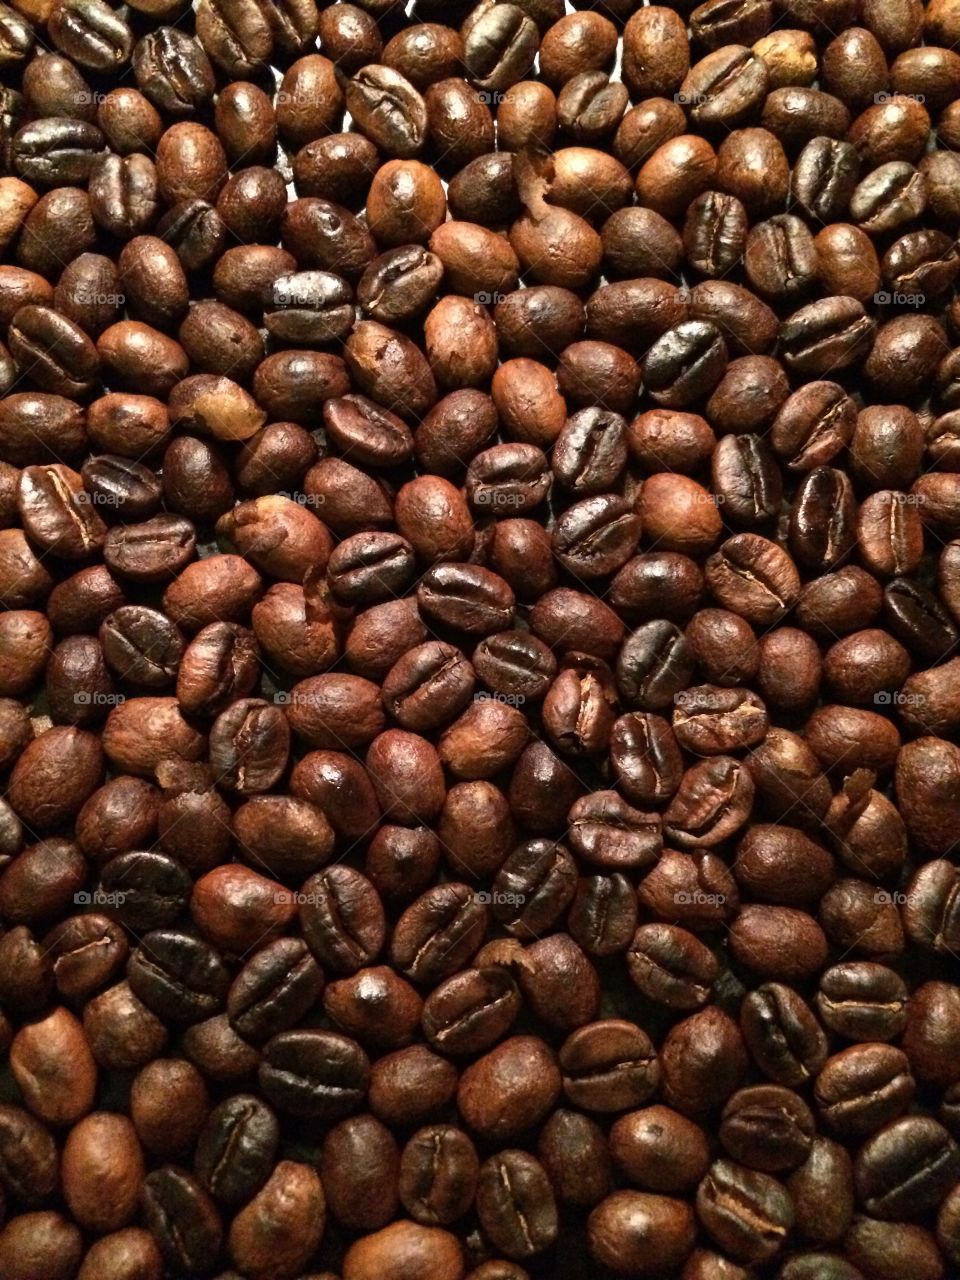 Coffee roasting . Roasting coffee beans at home